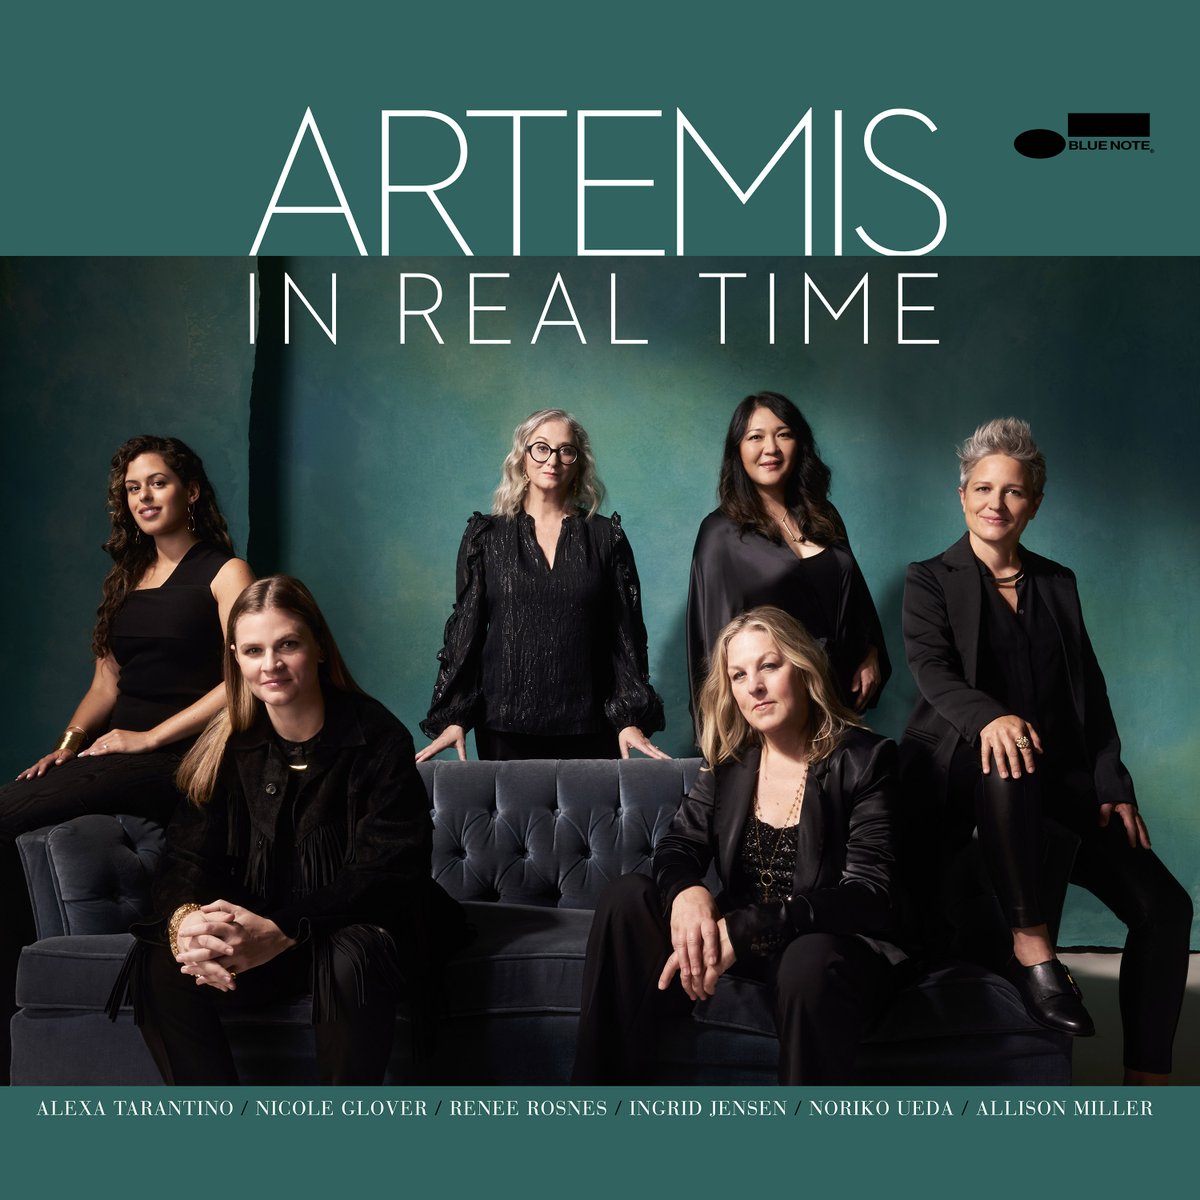 .@ArtemisJazz returns May 5 with 'In Real Time' featuring a dynamic new line-up with Renee Rosnes, Ingrid Jensen, Noriko Ueda & Allison Miller joined by Nicole Glover & Alexa Tarantino. Pre-order on vinyl, CD or digital & hear 'Lights Away From Home': artemis.lnk.to/InRealTime